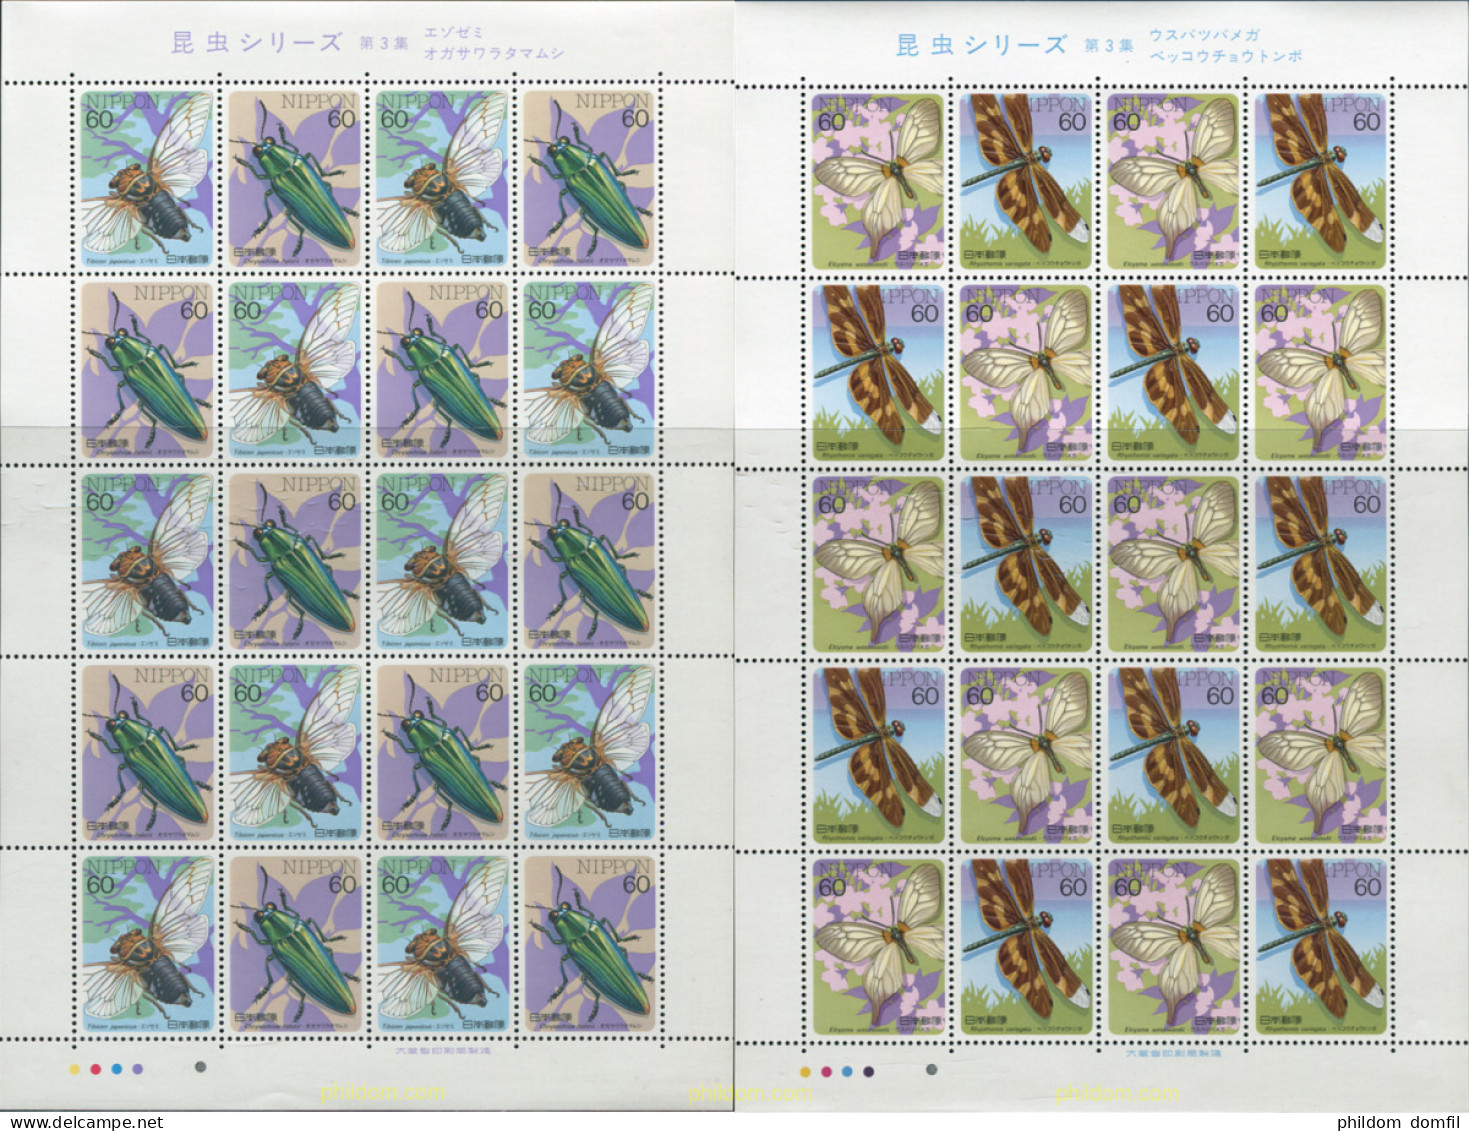 337331 MNH JAPON 1986 INSECTOS - Neufs